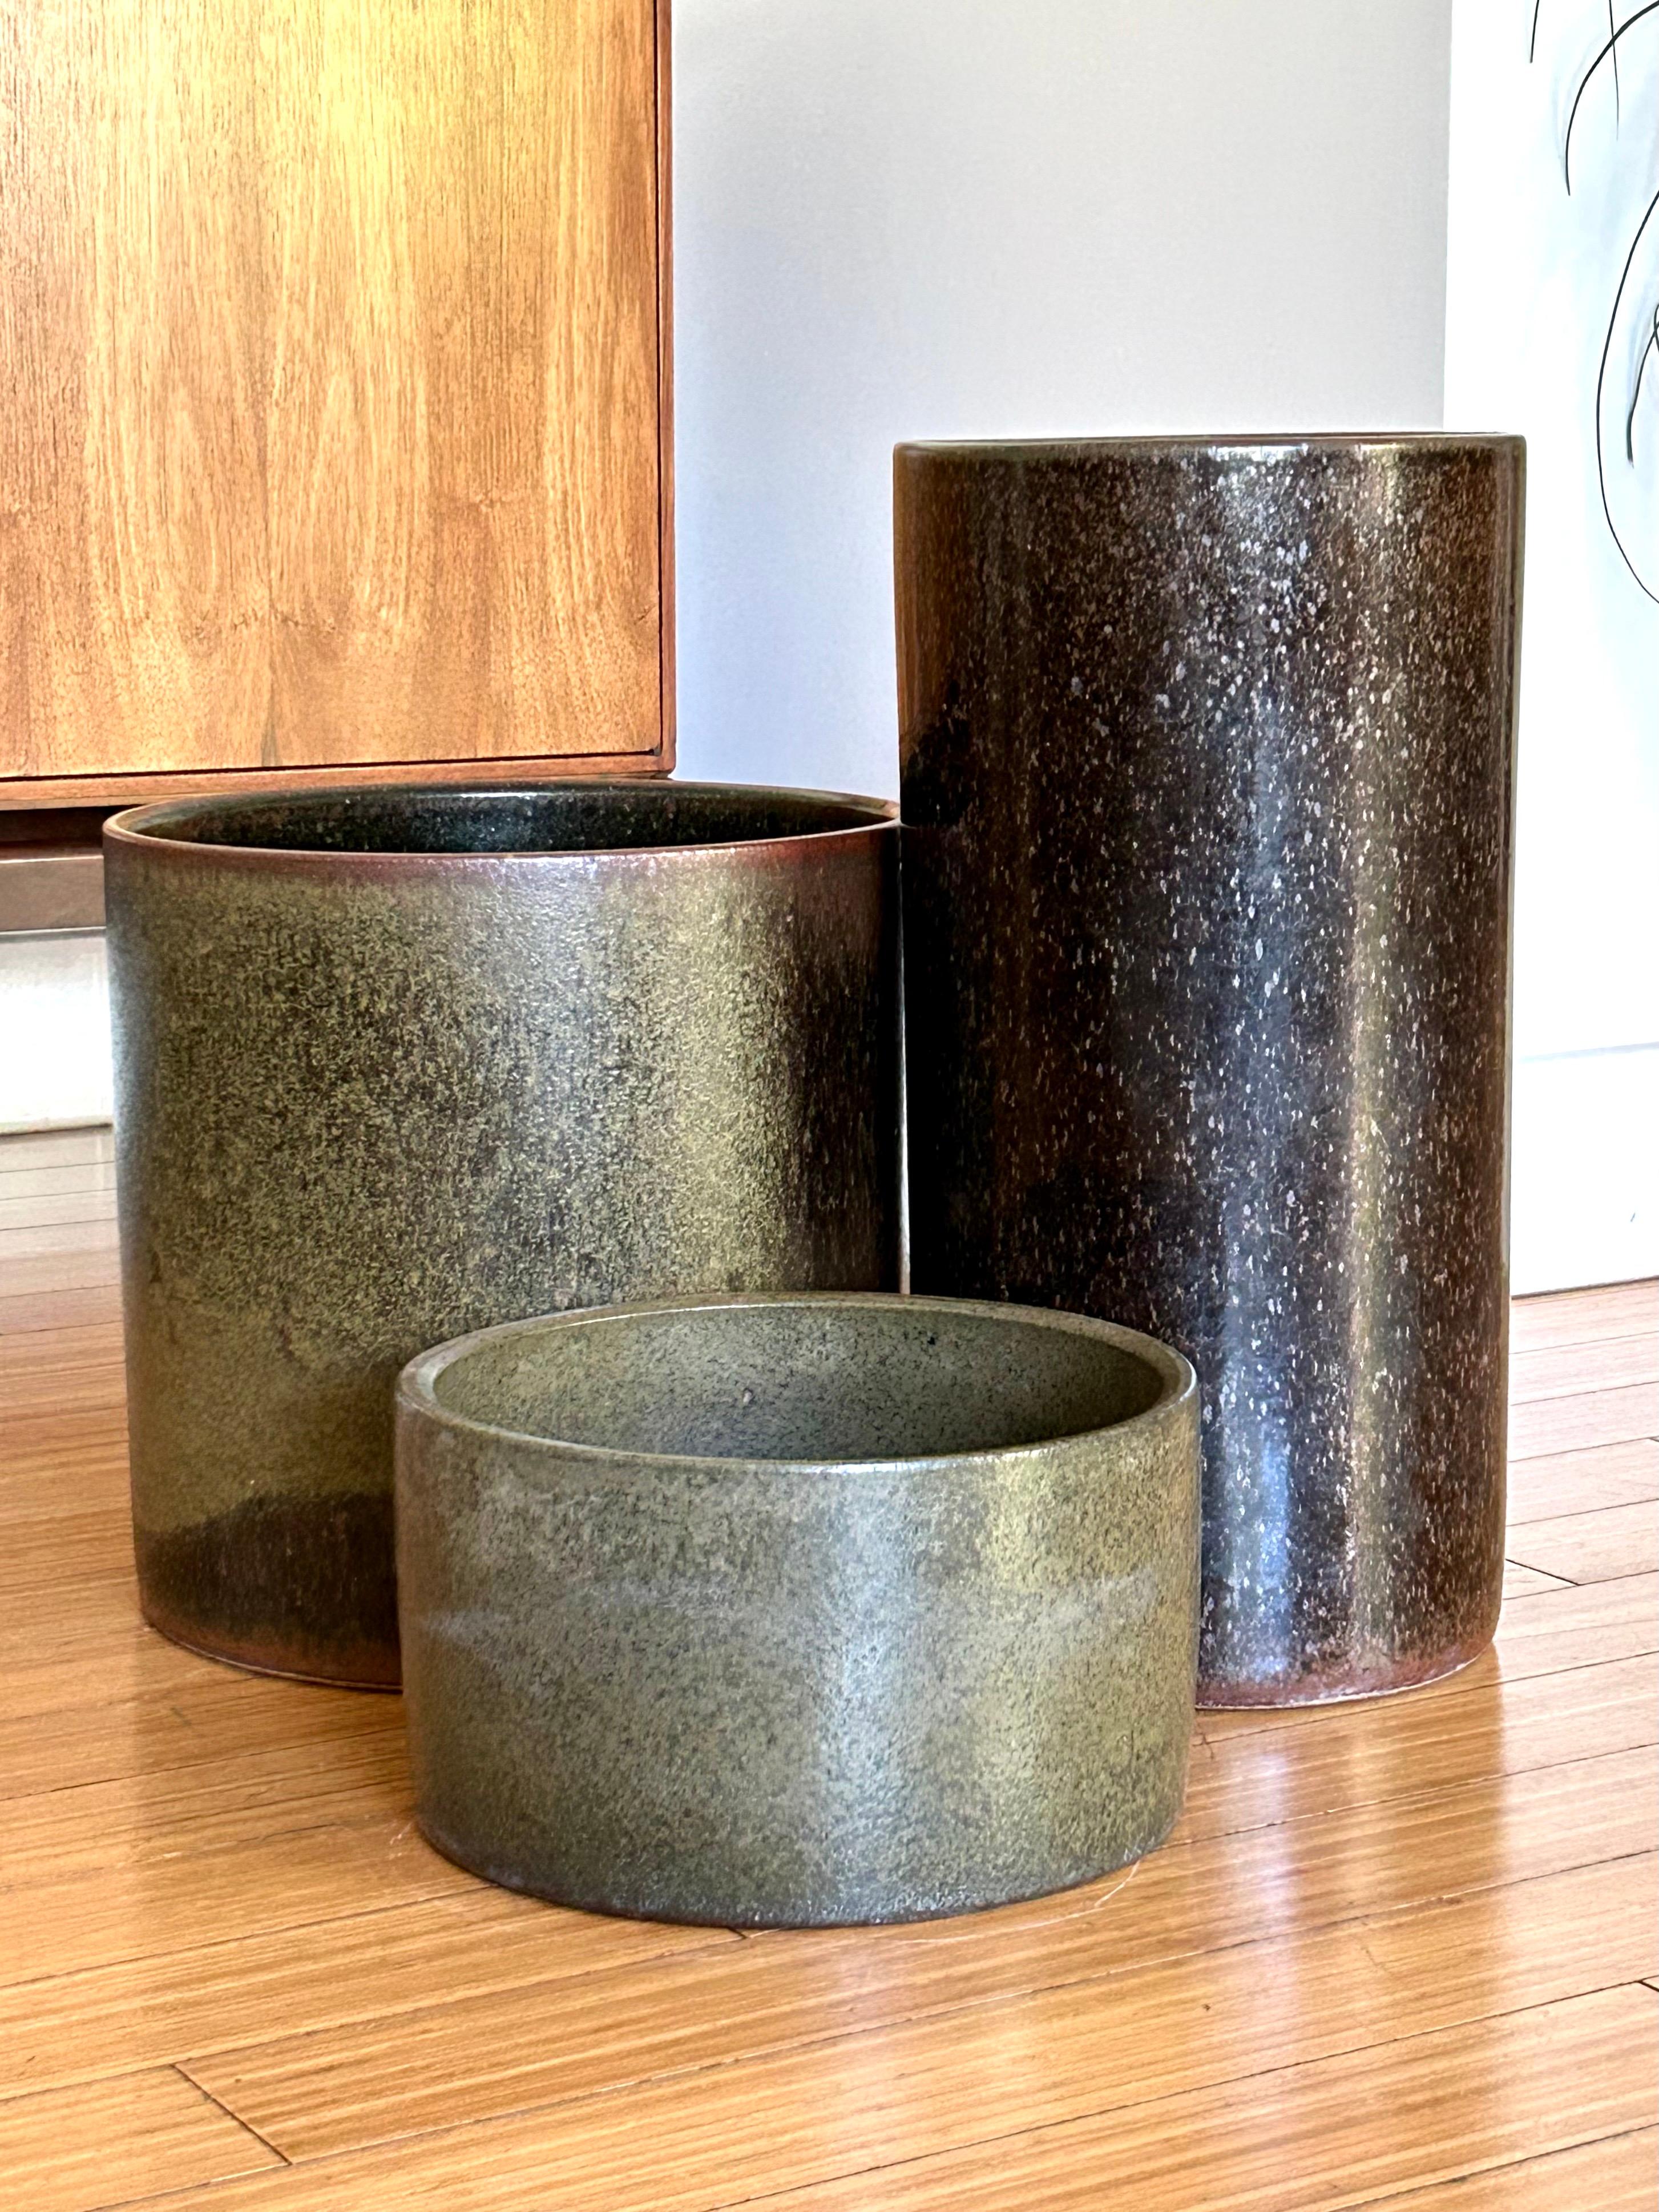 Timeless California modernist design.
Made with Cressey's own reduction fired stoneware 